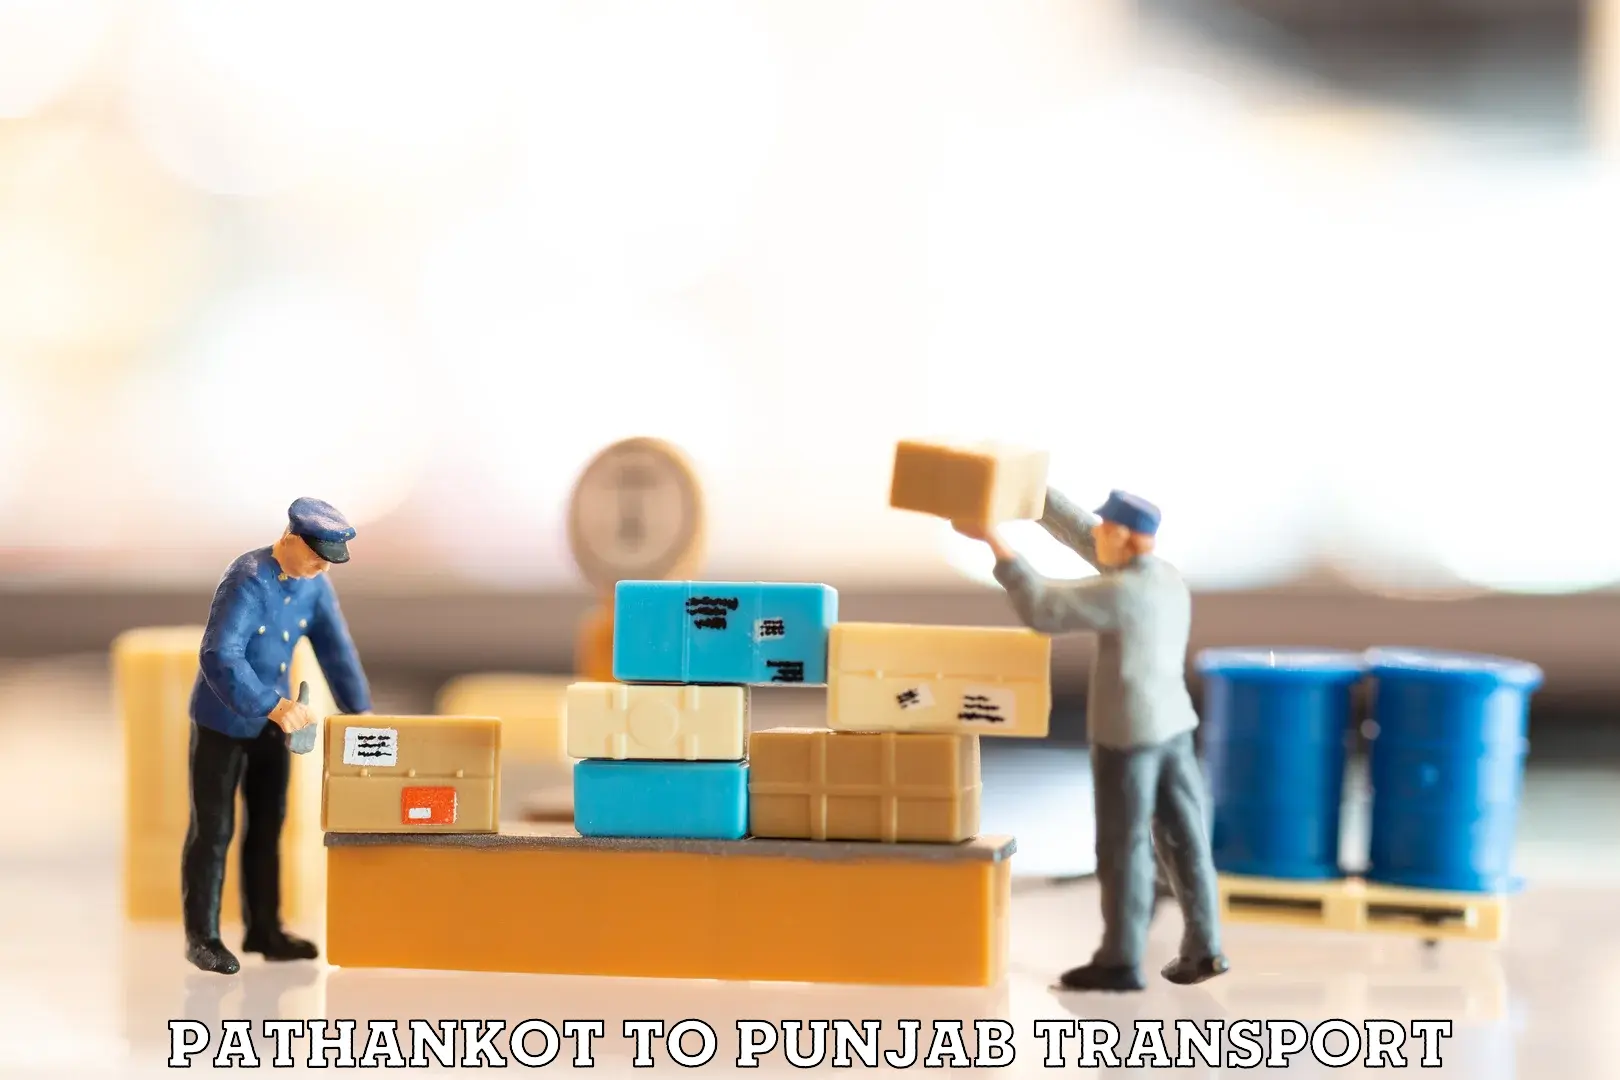 Daily parcel service transport Pathankot to Fatehgarh Sahib